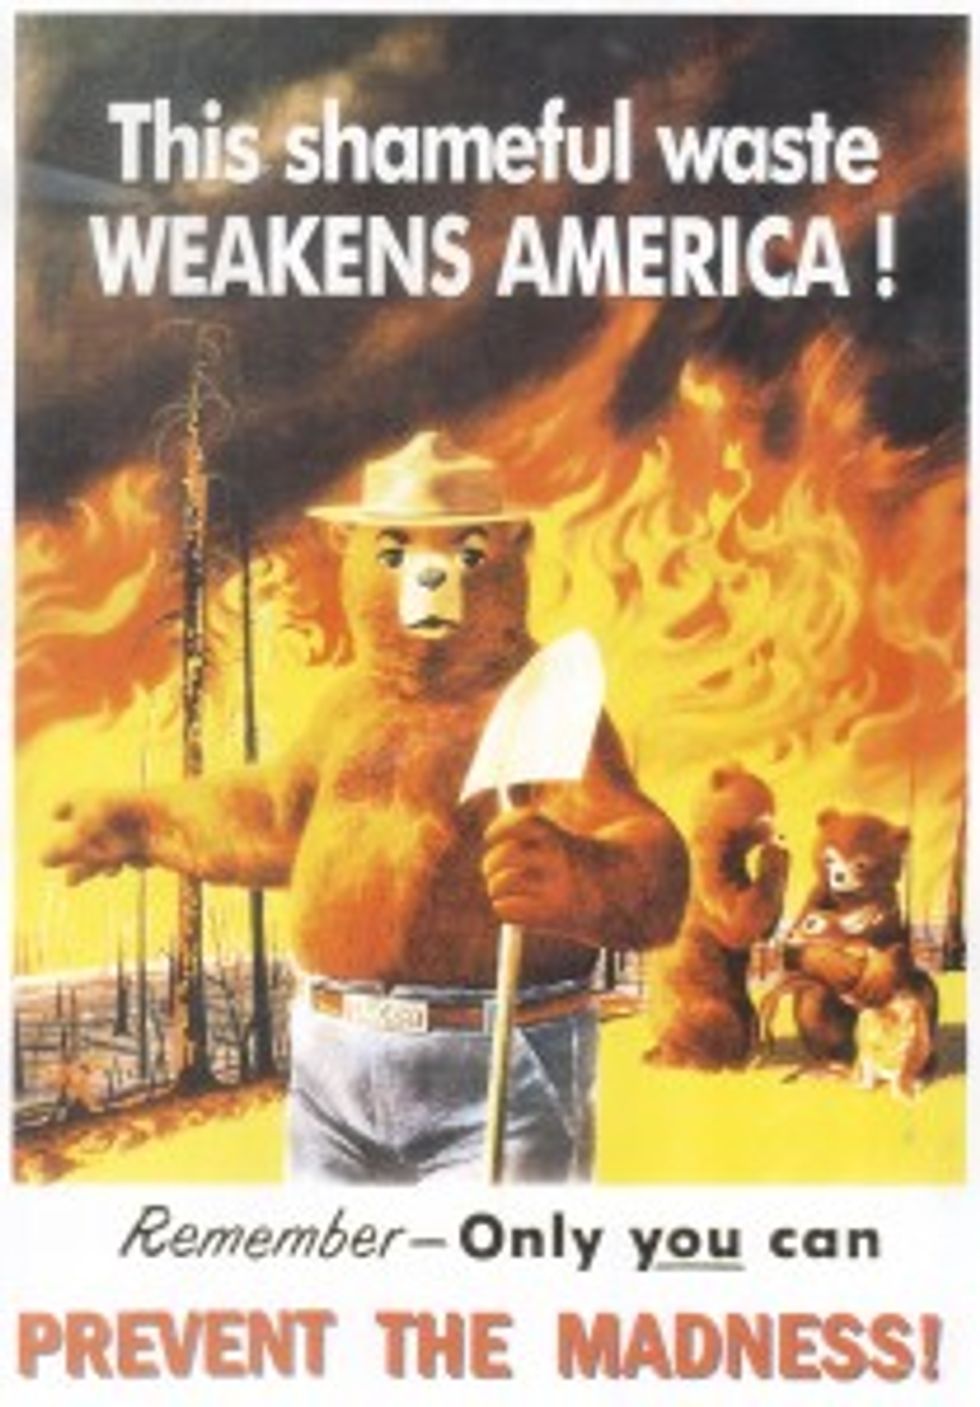 Mitch McConnell Has New Enemy No. One: Smokey The Bear